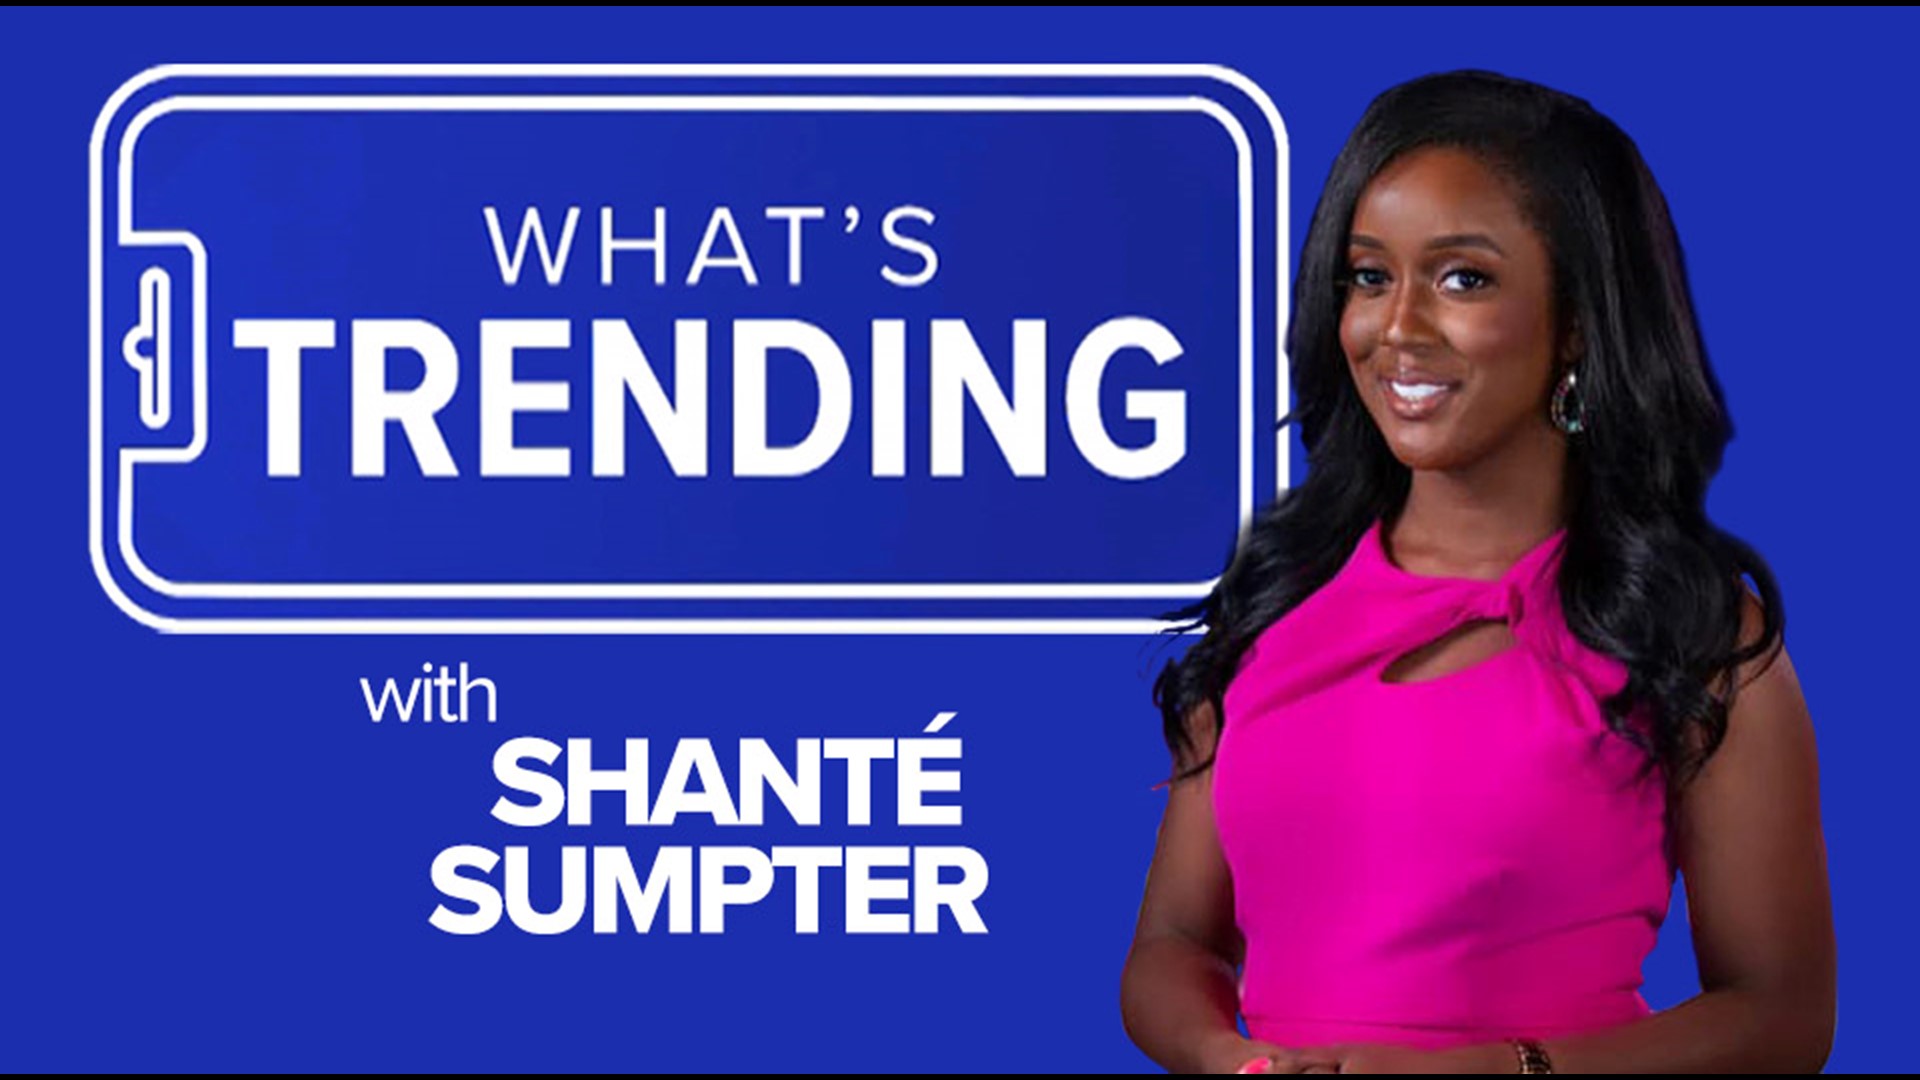 A lost Beatles documentary, a new emoji trend and a pair of Miami eagles make their debut. Shante Sumpter has what's trending on October 14th.